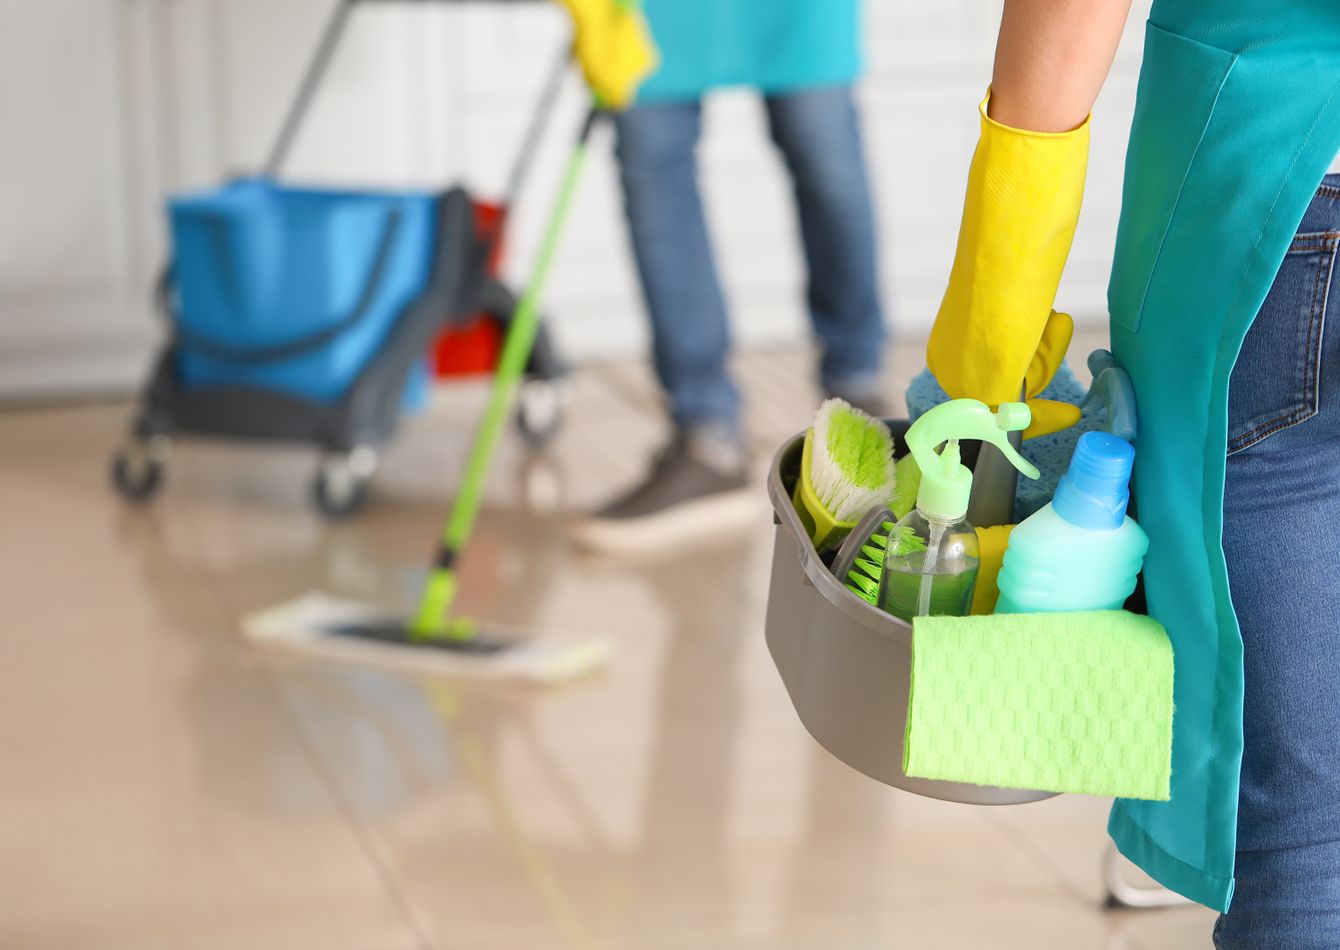 commercial cleaning company near me in Dallas, TX